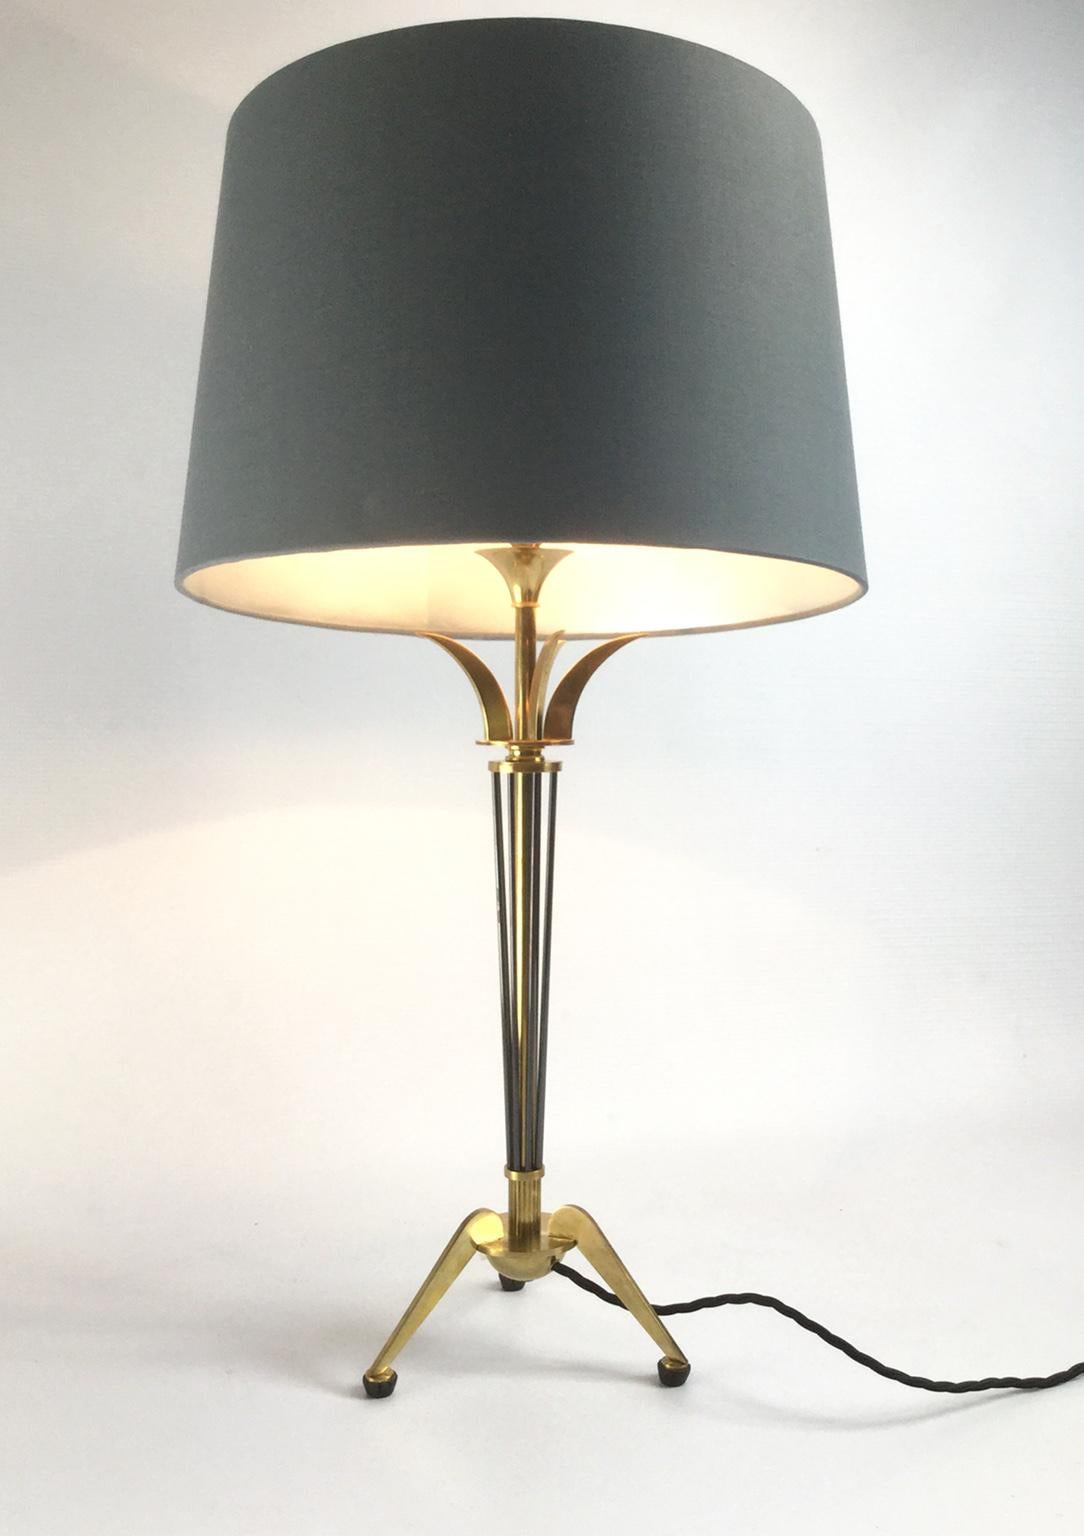 1950s table lamp attributed to Maison Jansen with a golden brass finish and gun barrel patina.
Rewired with black cotton-insulated cable
Dimensions:
71cm high with the shade (40cm diameter)
52cm high without shade
19cm depth floor base.
  